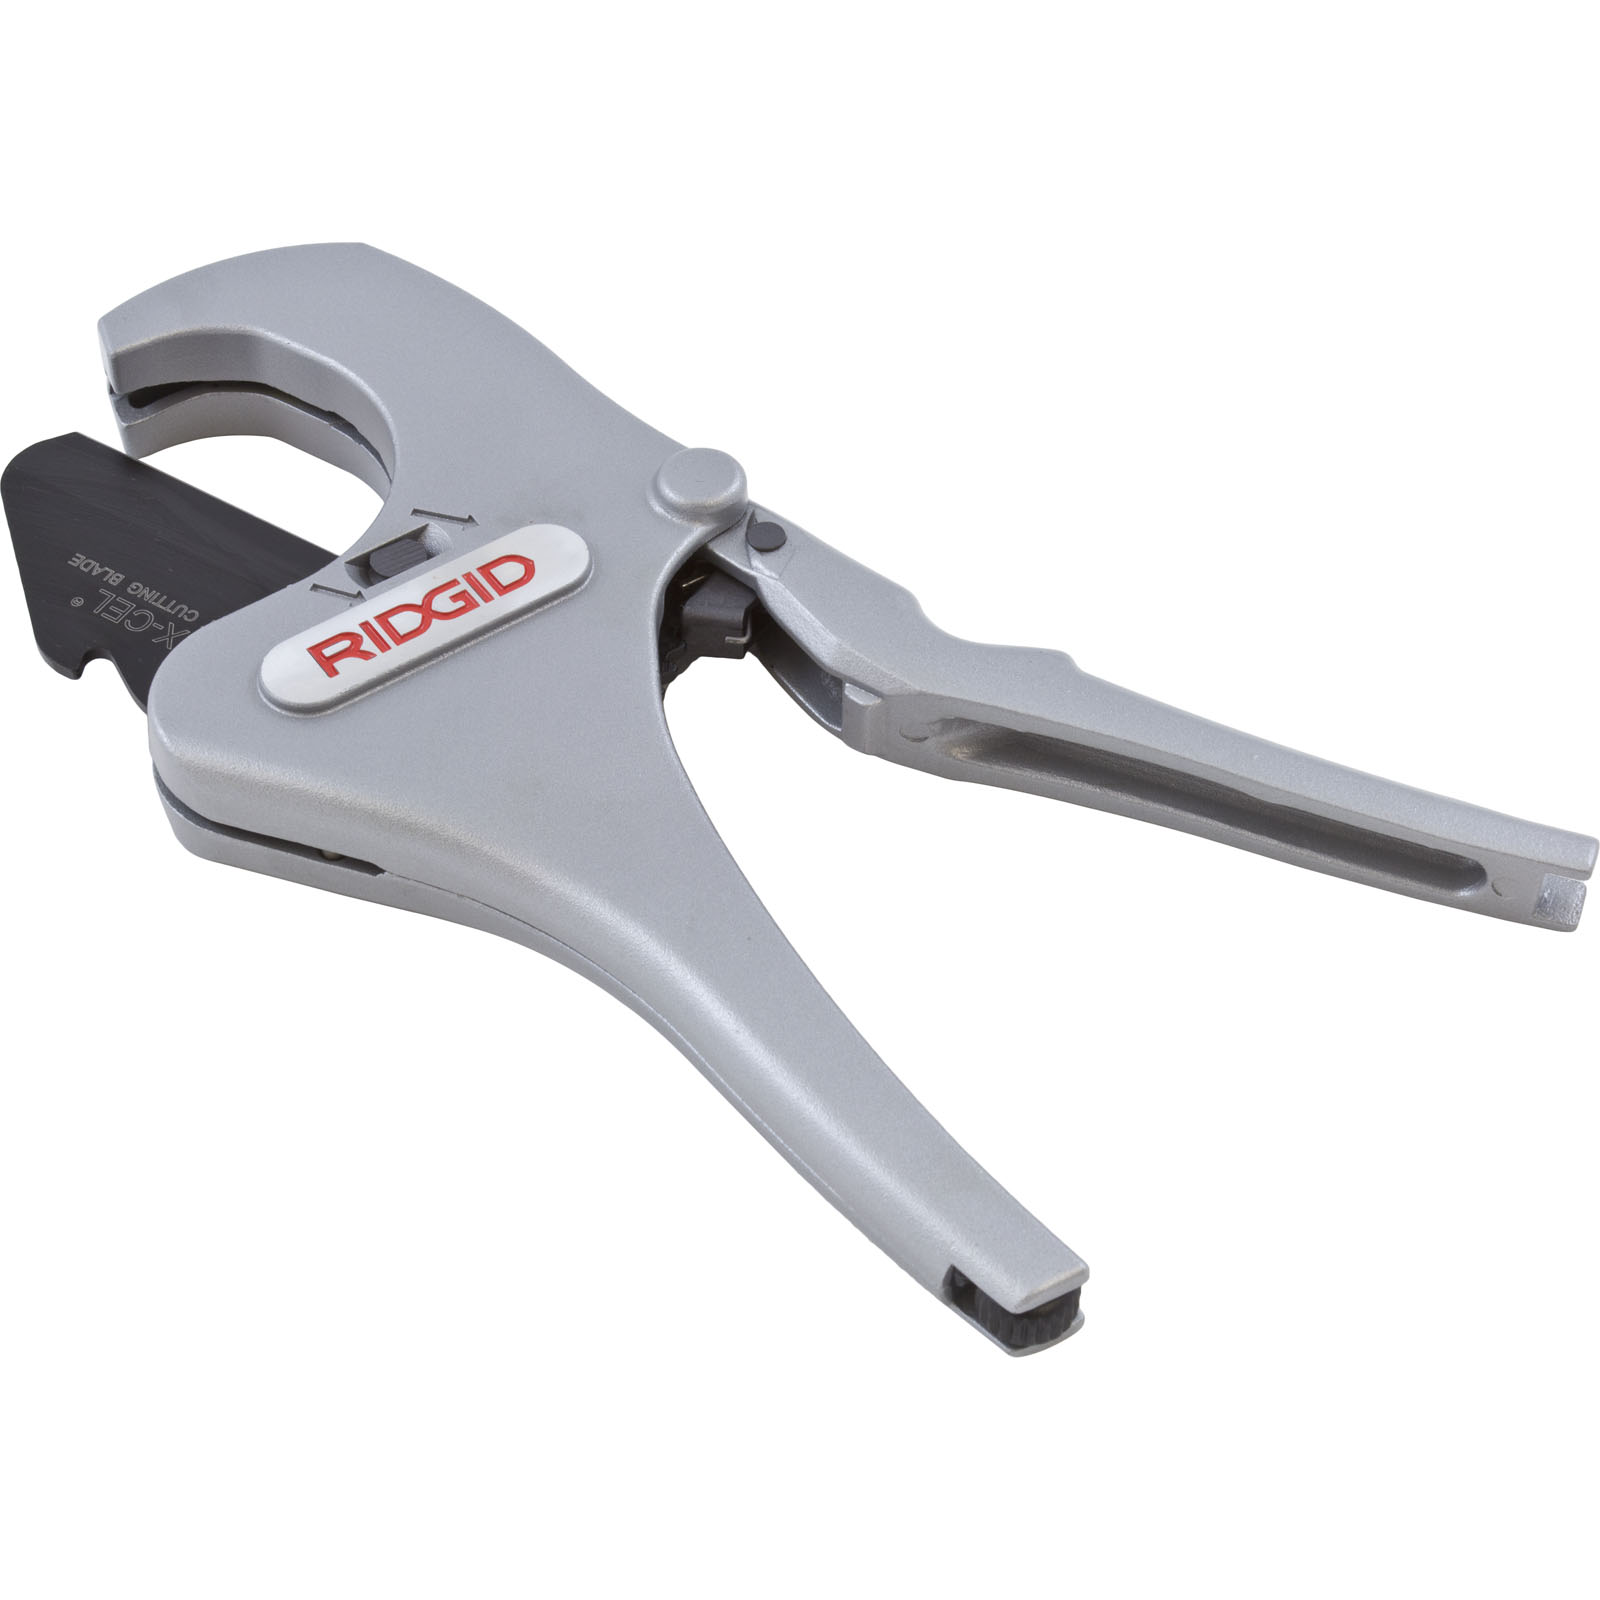 Ridgid Ridge Tool Company 30088 Ridgid® Ratcheting Pipe and Tubing Cutter, 1/2 In-2 3/8 in Cap., for Plastic Pipe/Tubing 30088 Pack of